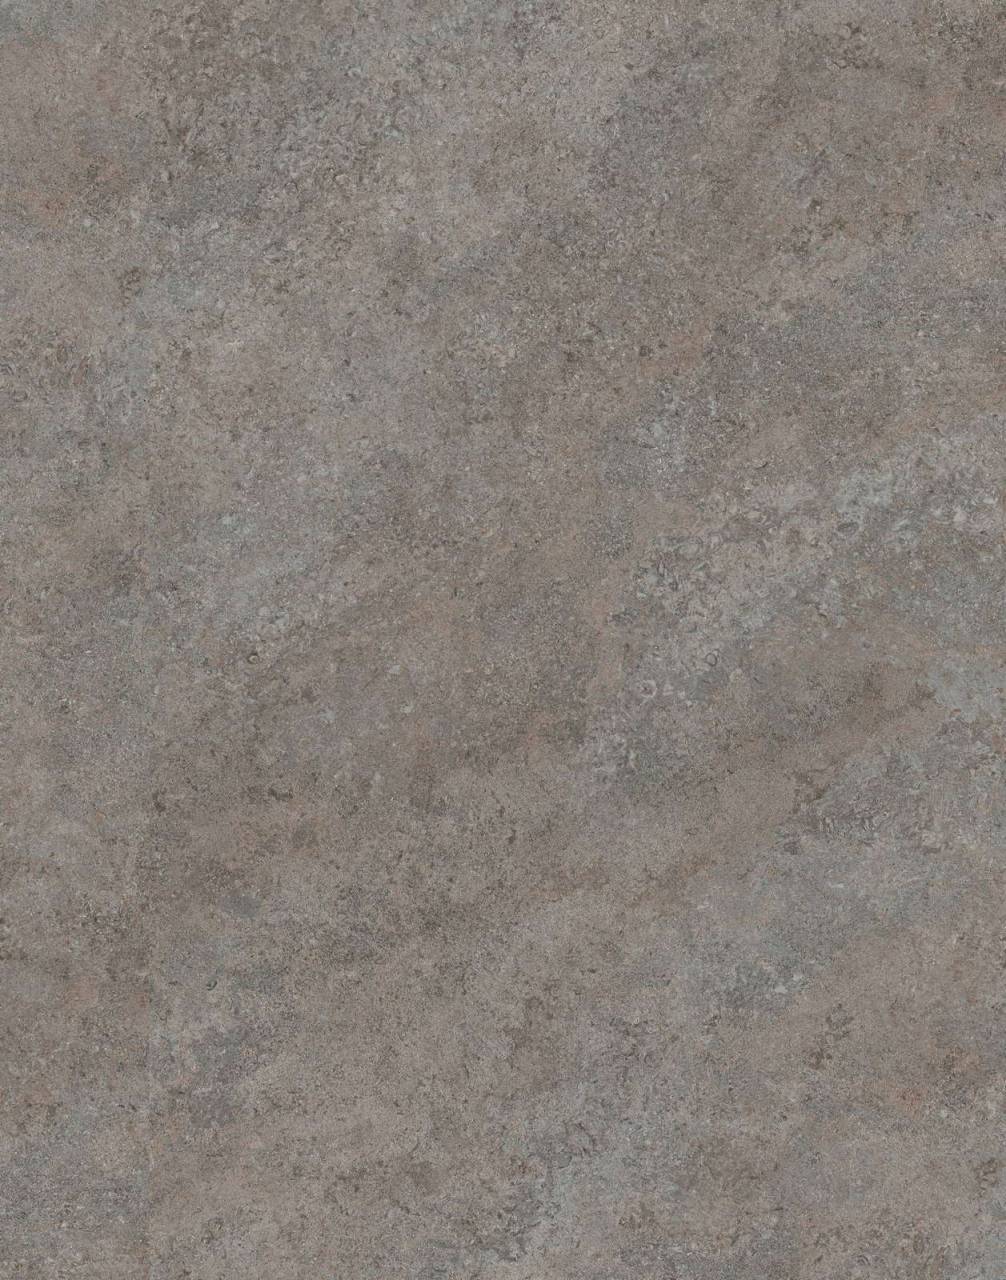 This is a Grey Albus PN laminate worktop sample, K540, with a smooth, grey wood-like design.